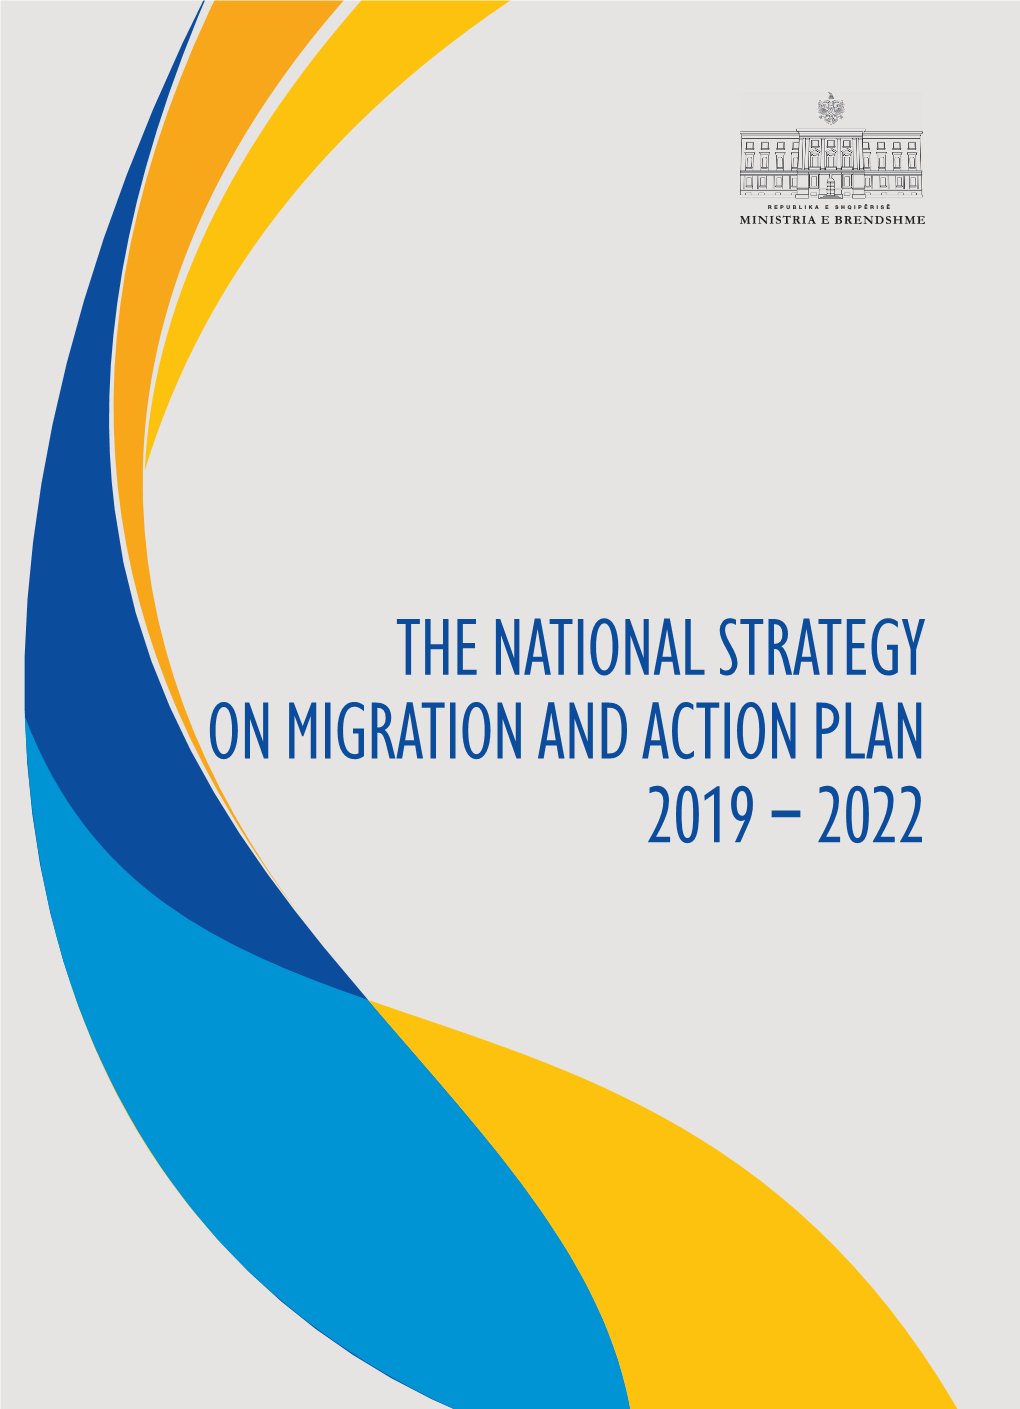 The National Strategy on Migration and Action Plan 2019